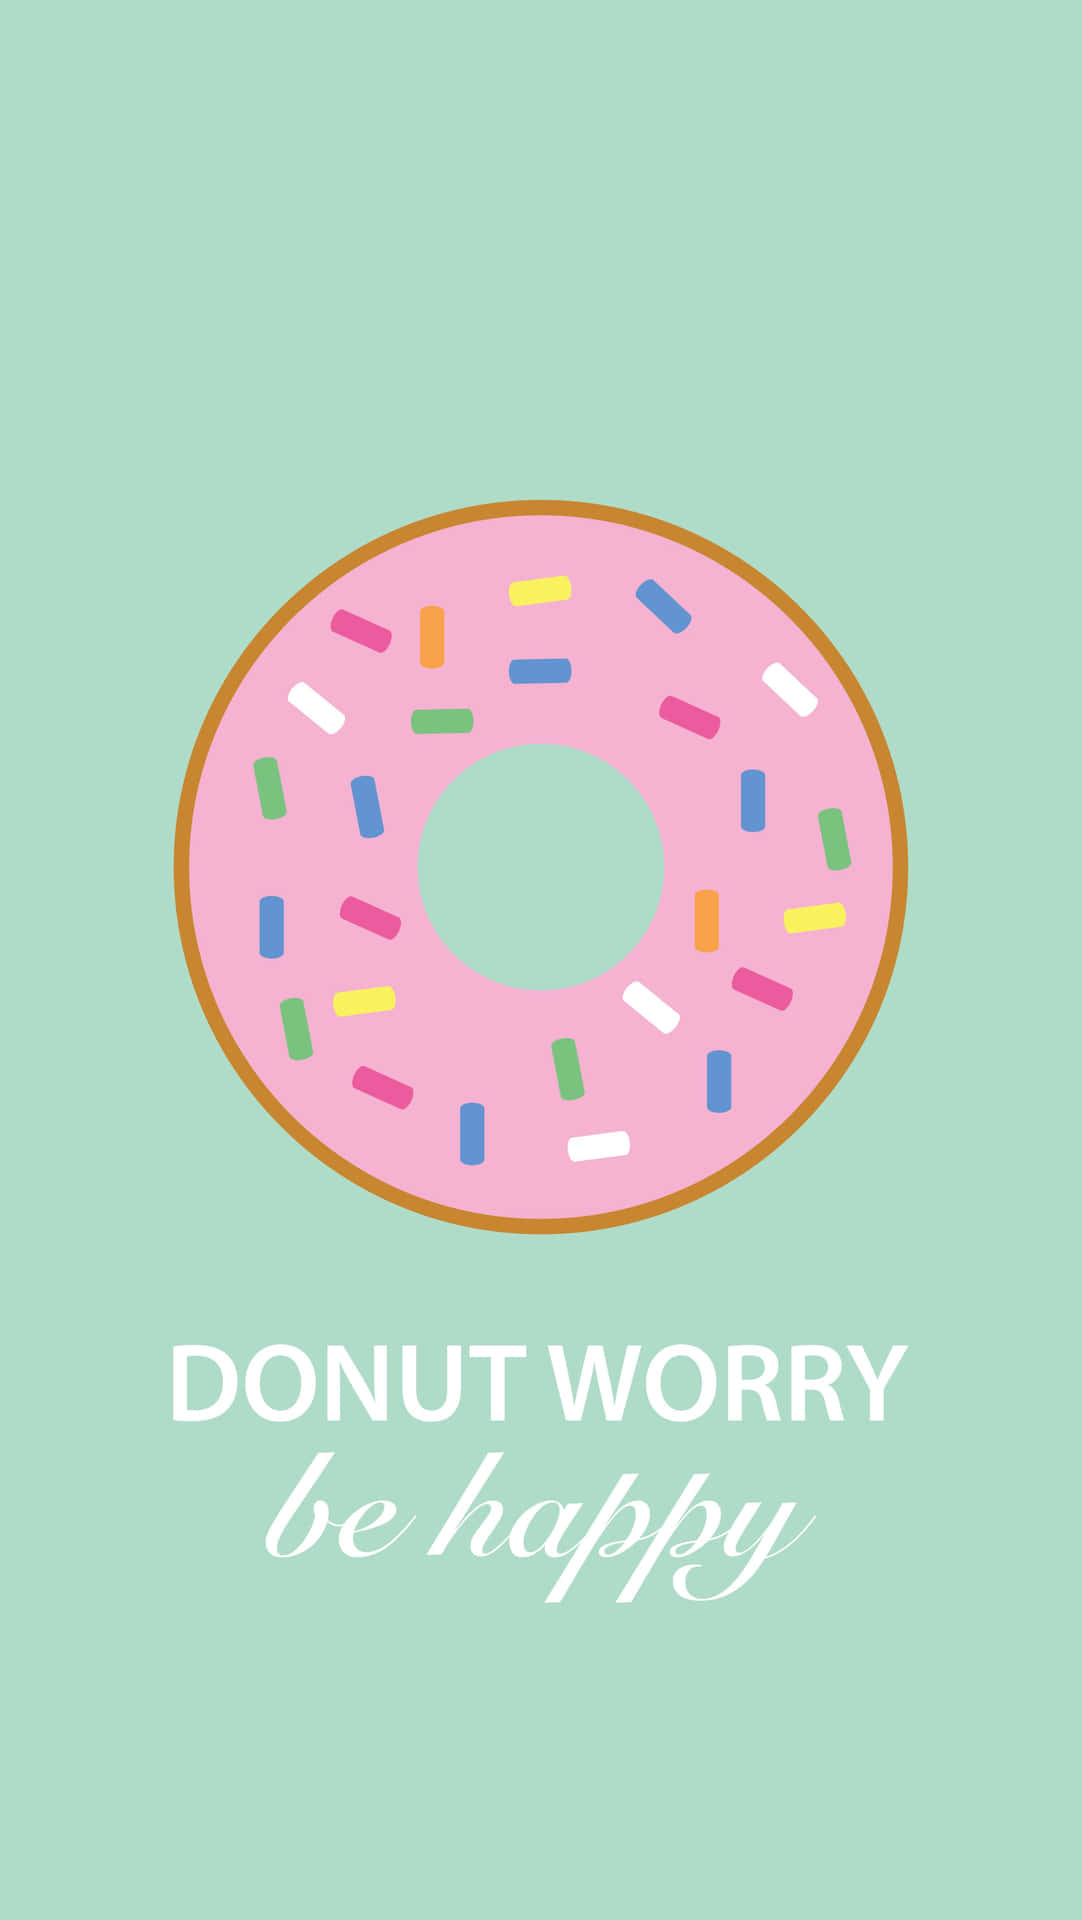 A Rainbow Of Colorful Donuts Displayed Against A Brilliant Pastel Background